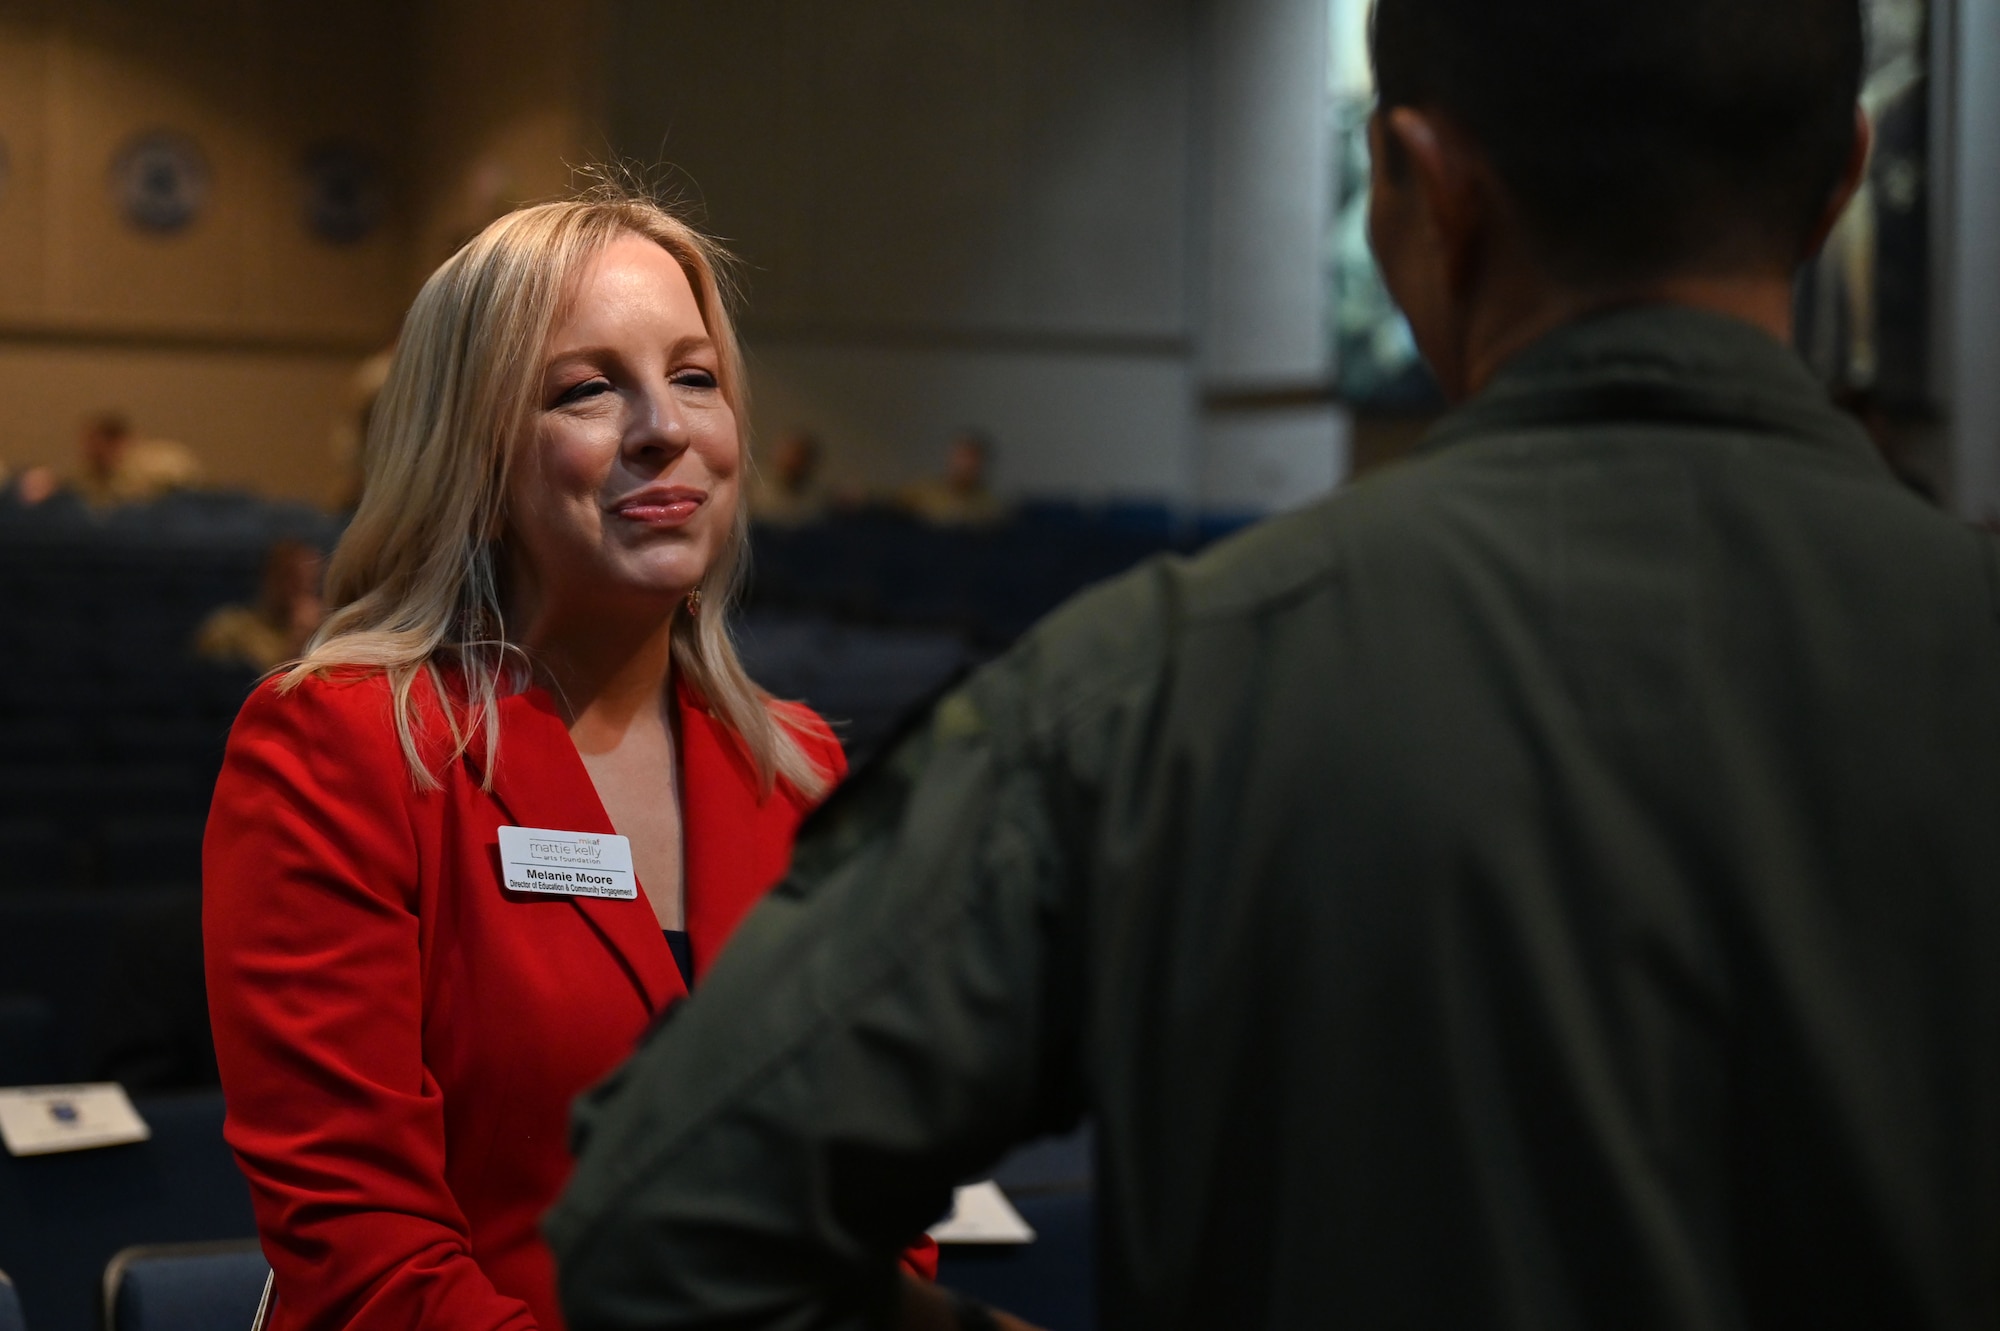 Melanie Moore, director of education and community engagement for the Mattie Kelly Arts Foundation, talks to U.S. Air Force Lt. Col. Chad Nishizuka, 16th Electronic Warfare Squadron commander, before the 350th Spectrum Warfare Wing’s first Honorary Commander induction ceremony, at Eglin Air Force Base, Fla., Dec. 1, 2023. The mission of the 350th Spectrum Warfare Wing Honorary Commanders Program is to educate key community leaders about a unit’s mission and to foster a supportive relationship with the community, while also increasing military involvement in civic endeavors and organizations. (U.S. Air Force photo by Staff Sgt. Ericka A. Woolever)